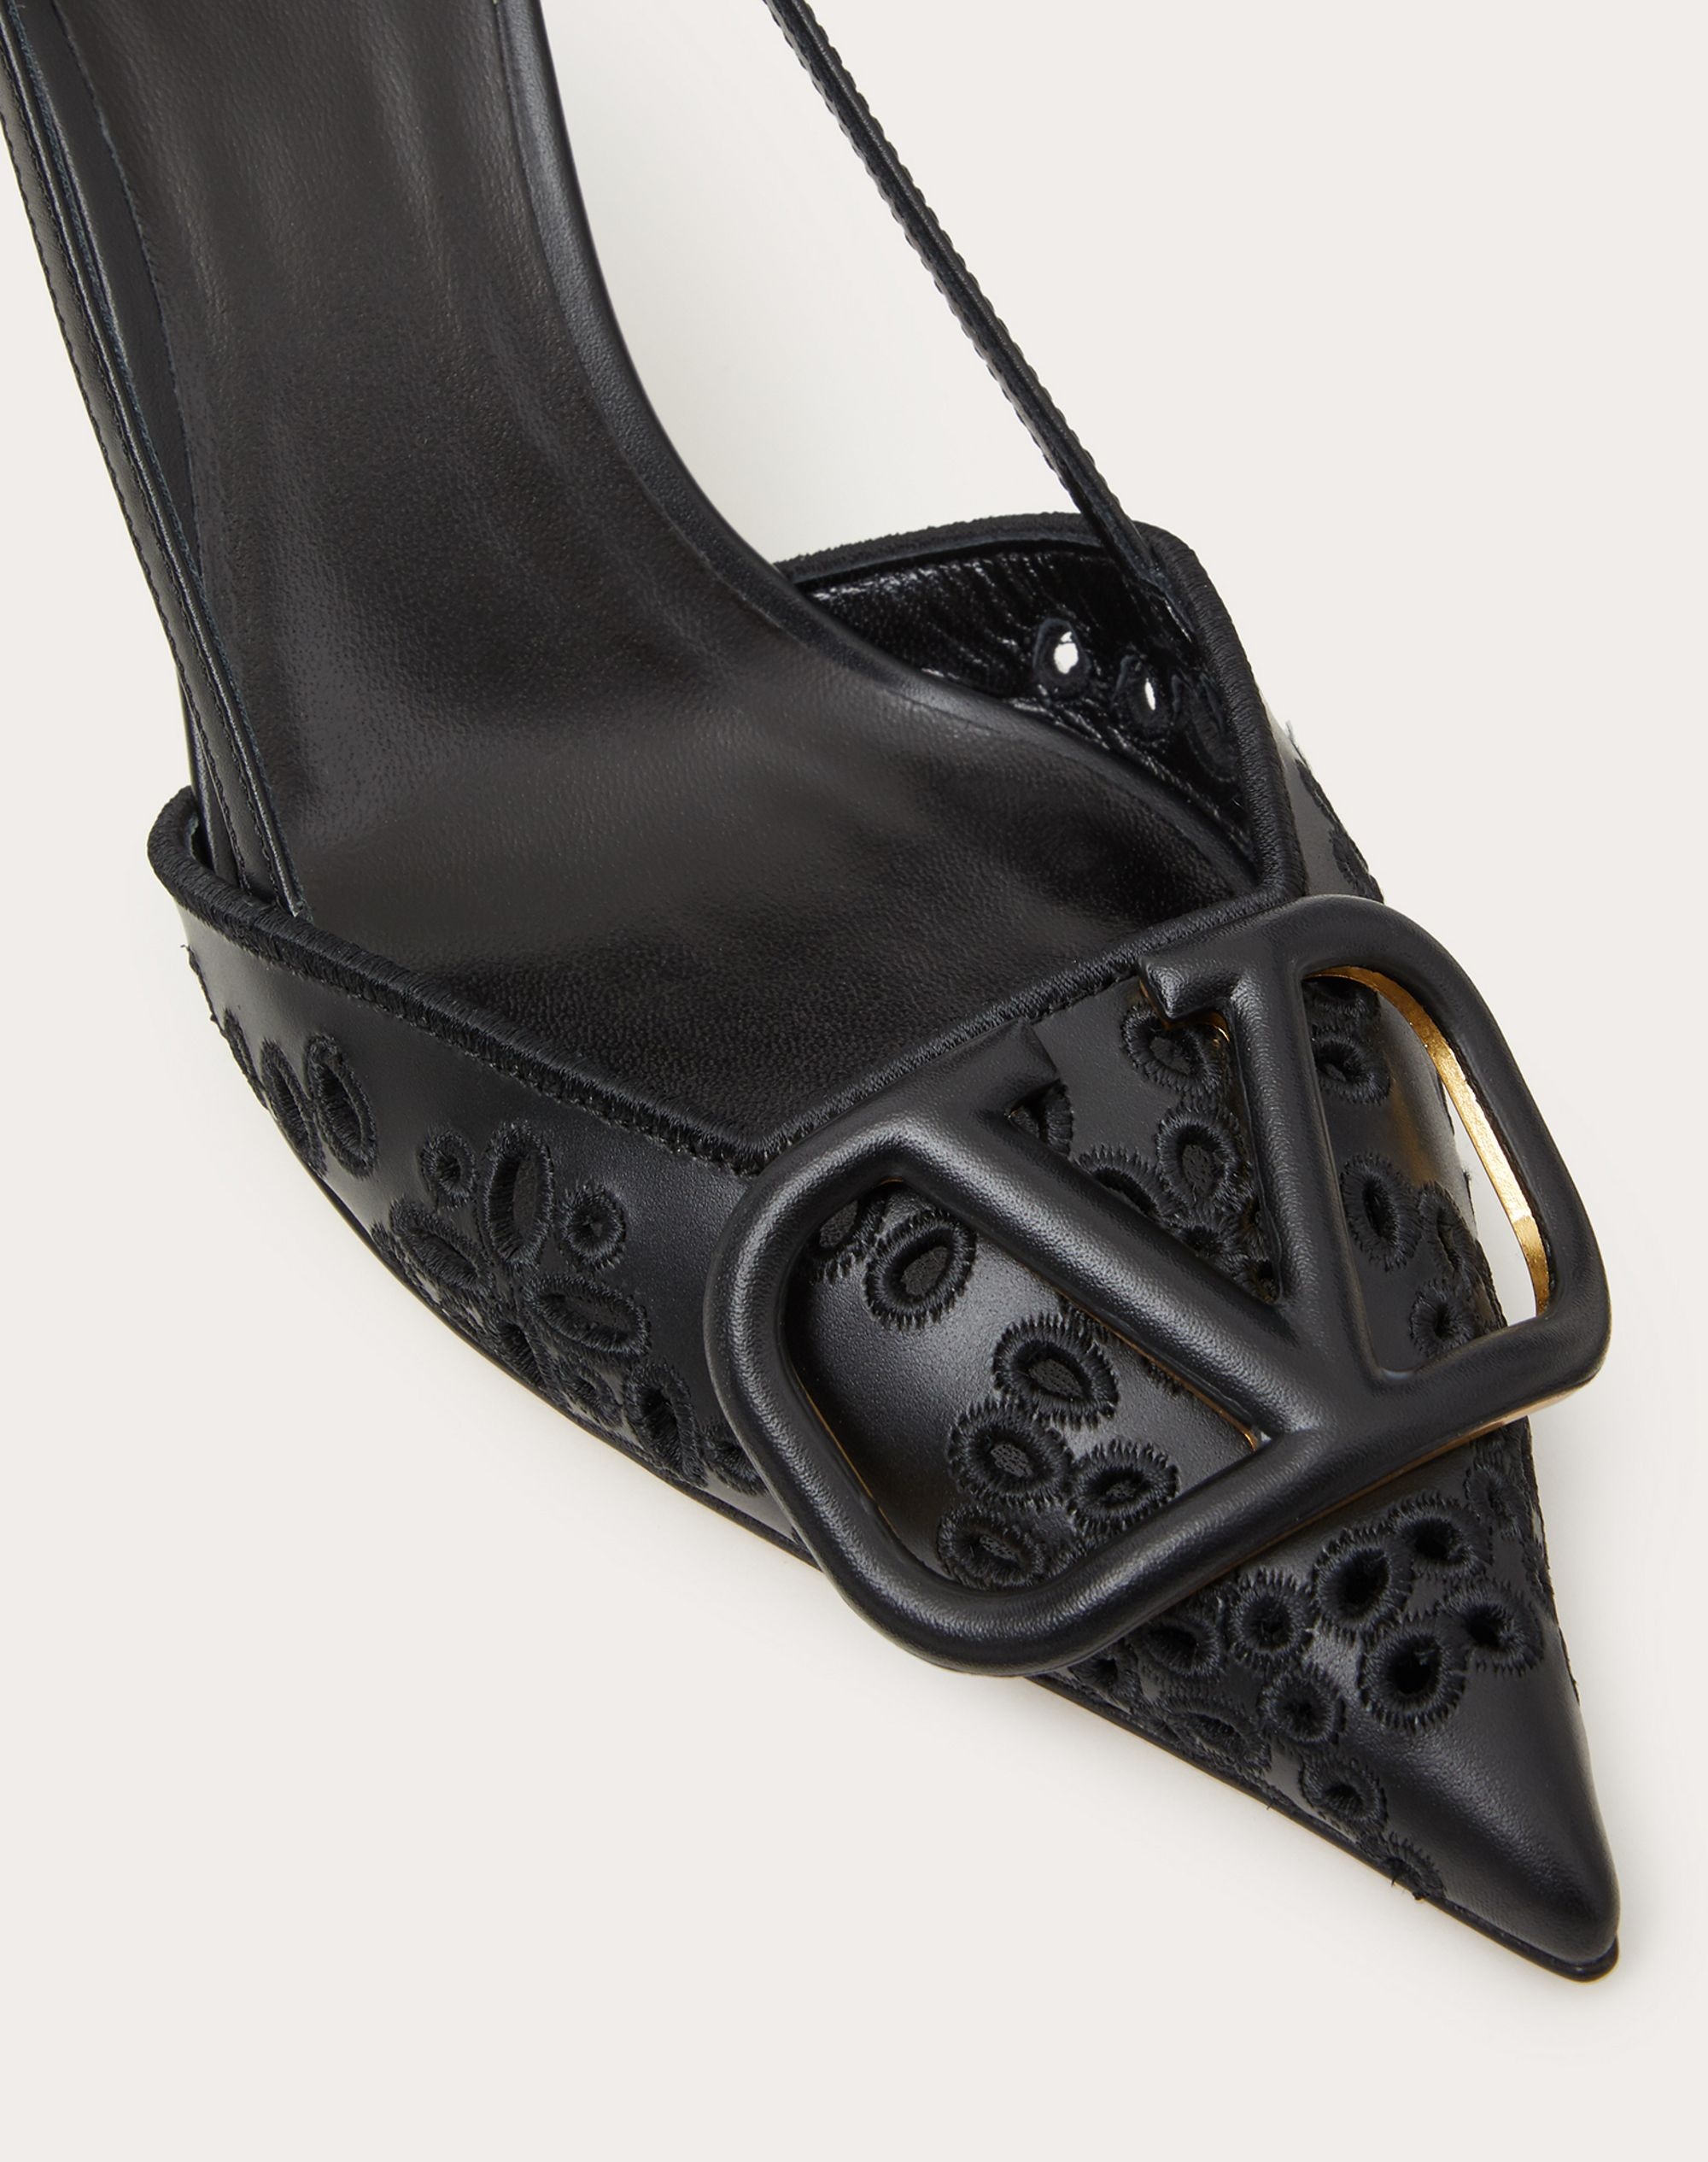 VLOGO SIGNATURE CALFSKIN SLINGBACK PUMP WITH SAN GALLO EMBROIDERY 80 MM - 5